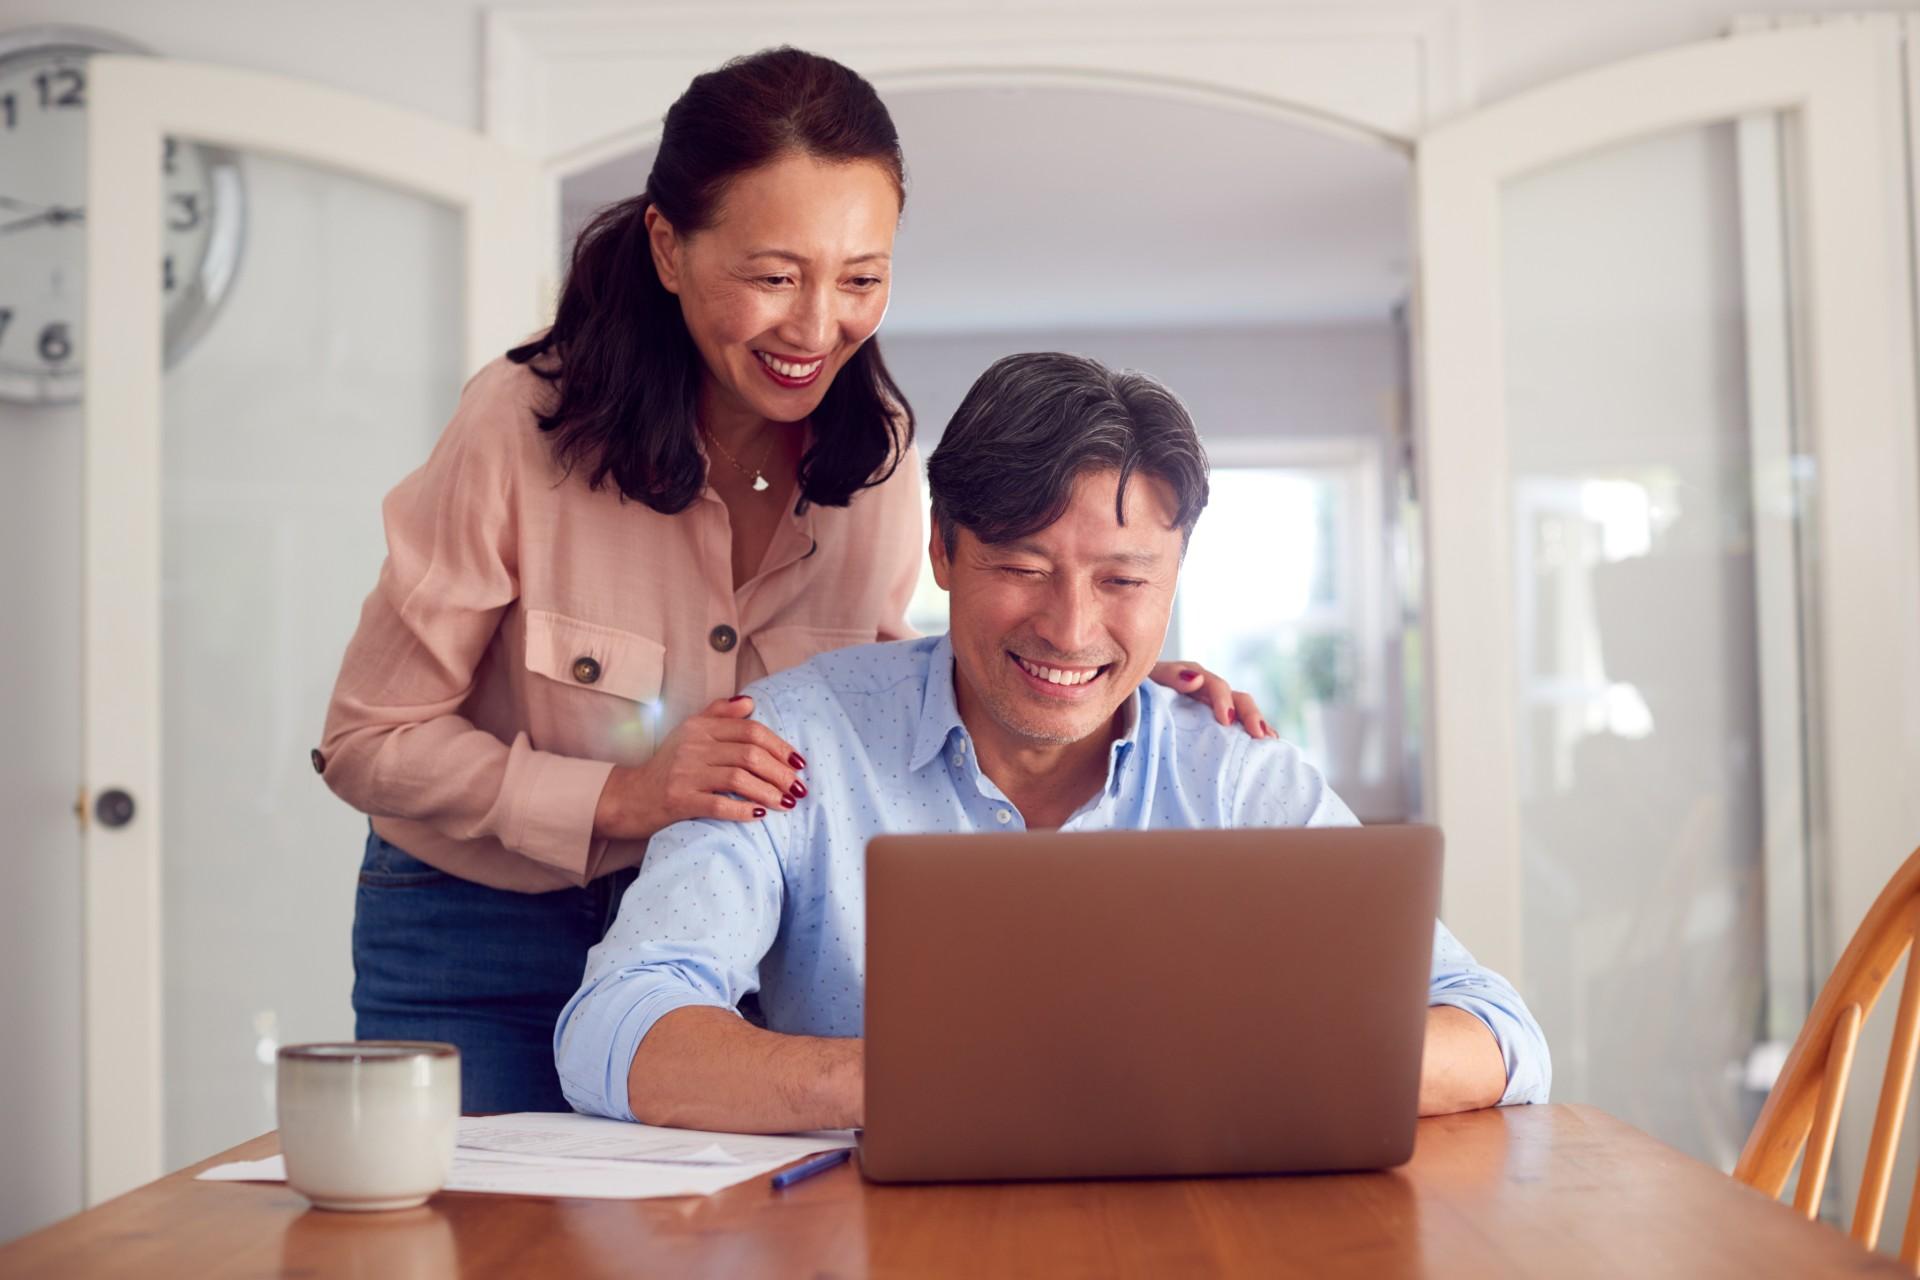 Middle-aged couple smiling while looking at a laptop on a dining room table